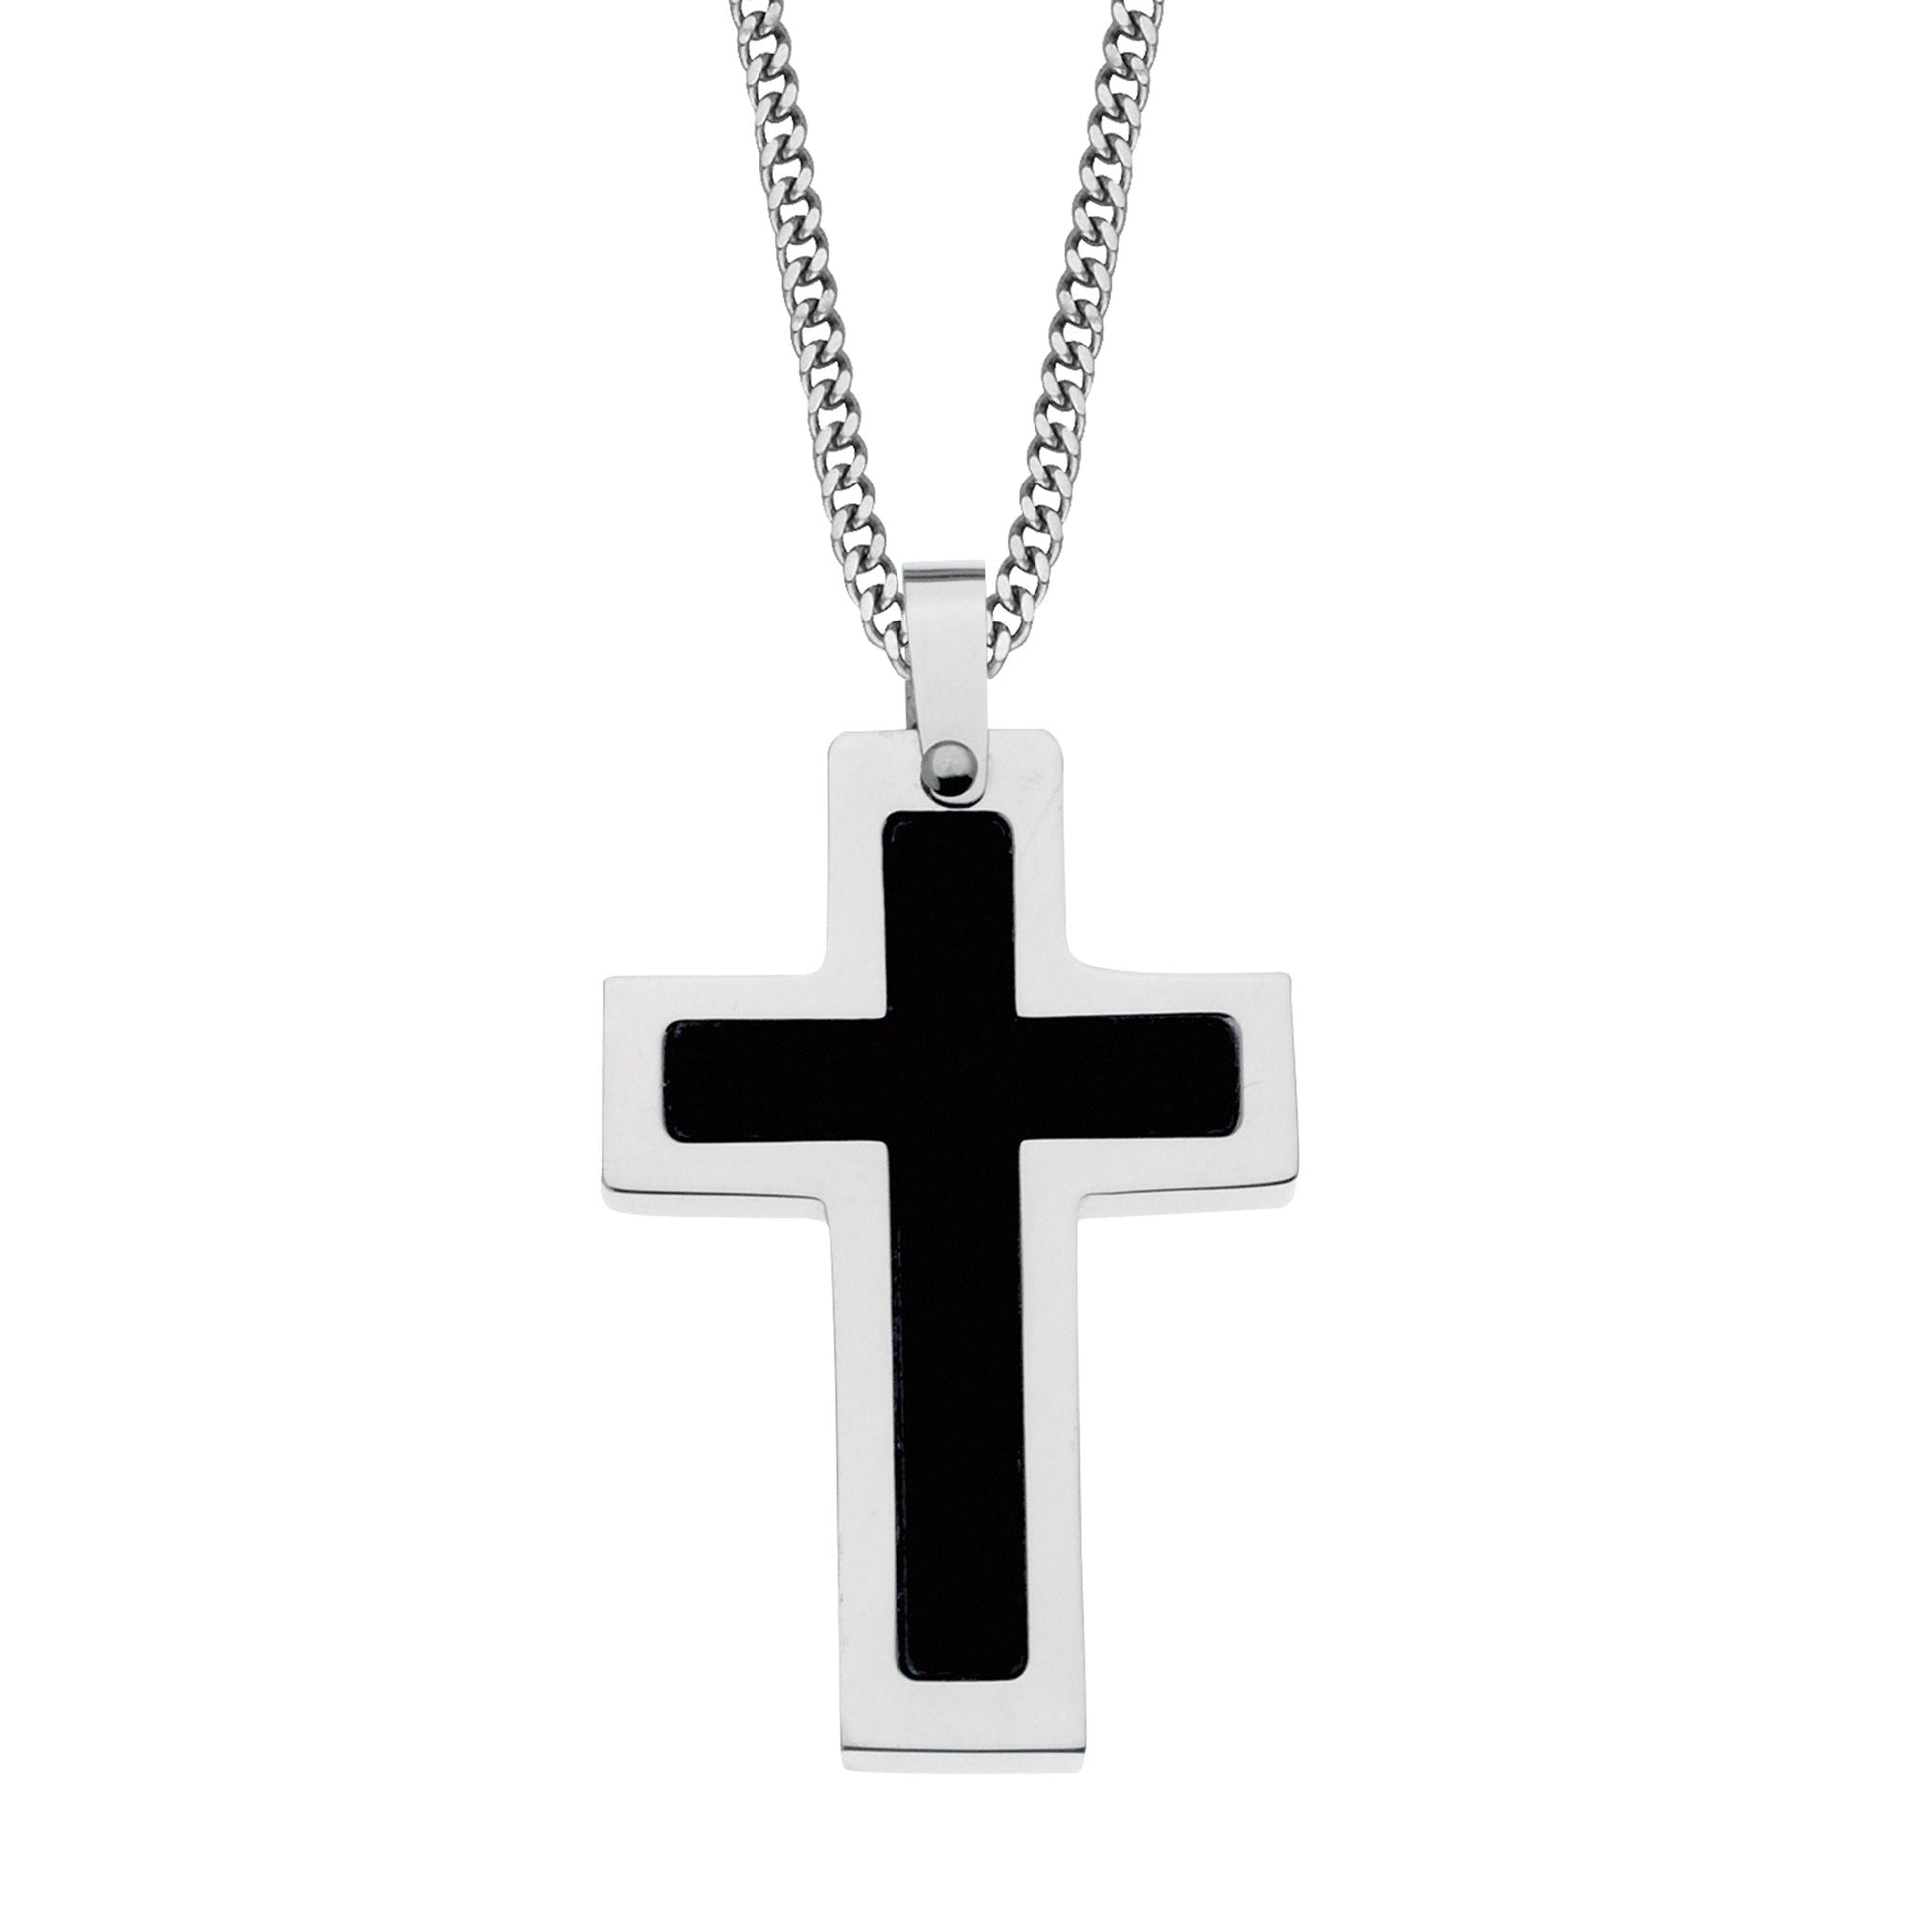 A stainless steel matte black cross men's necklace displayed on a neutral white background.